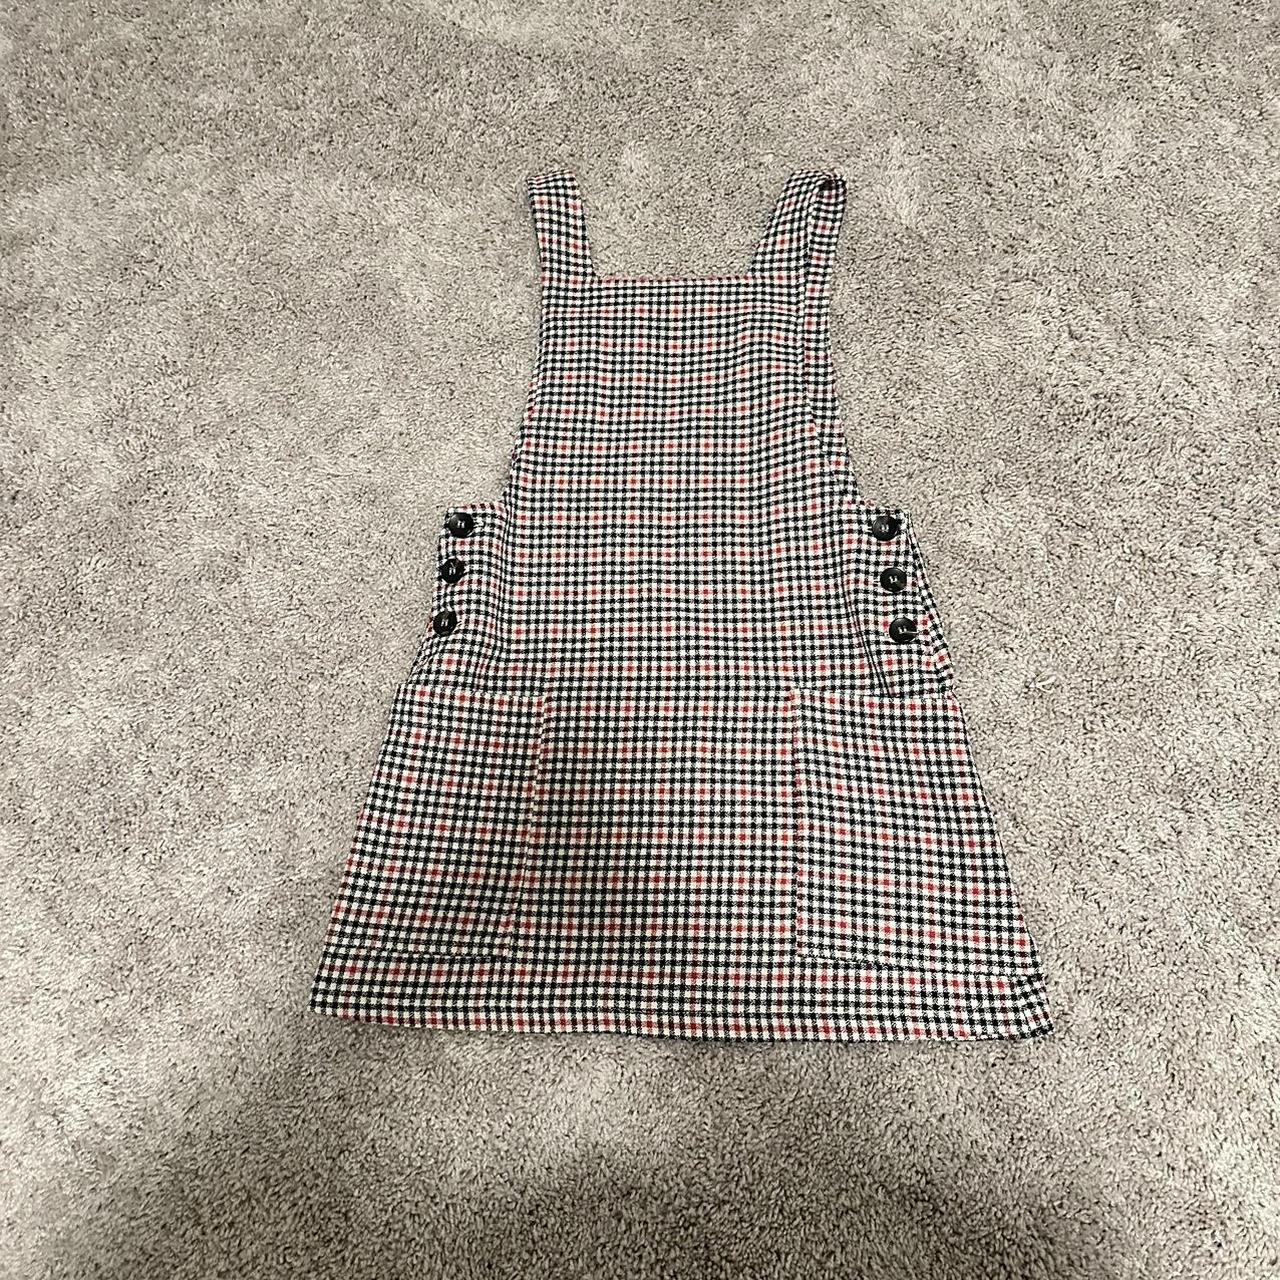 Urban Outfitters tattersall plaid dress red, white,... - Depop